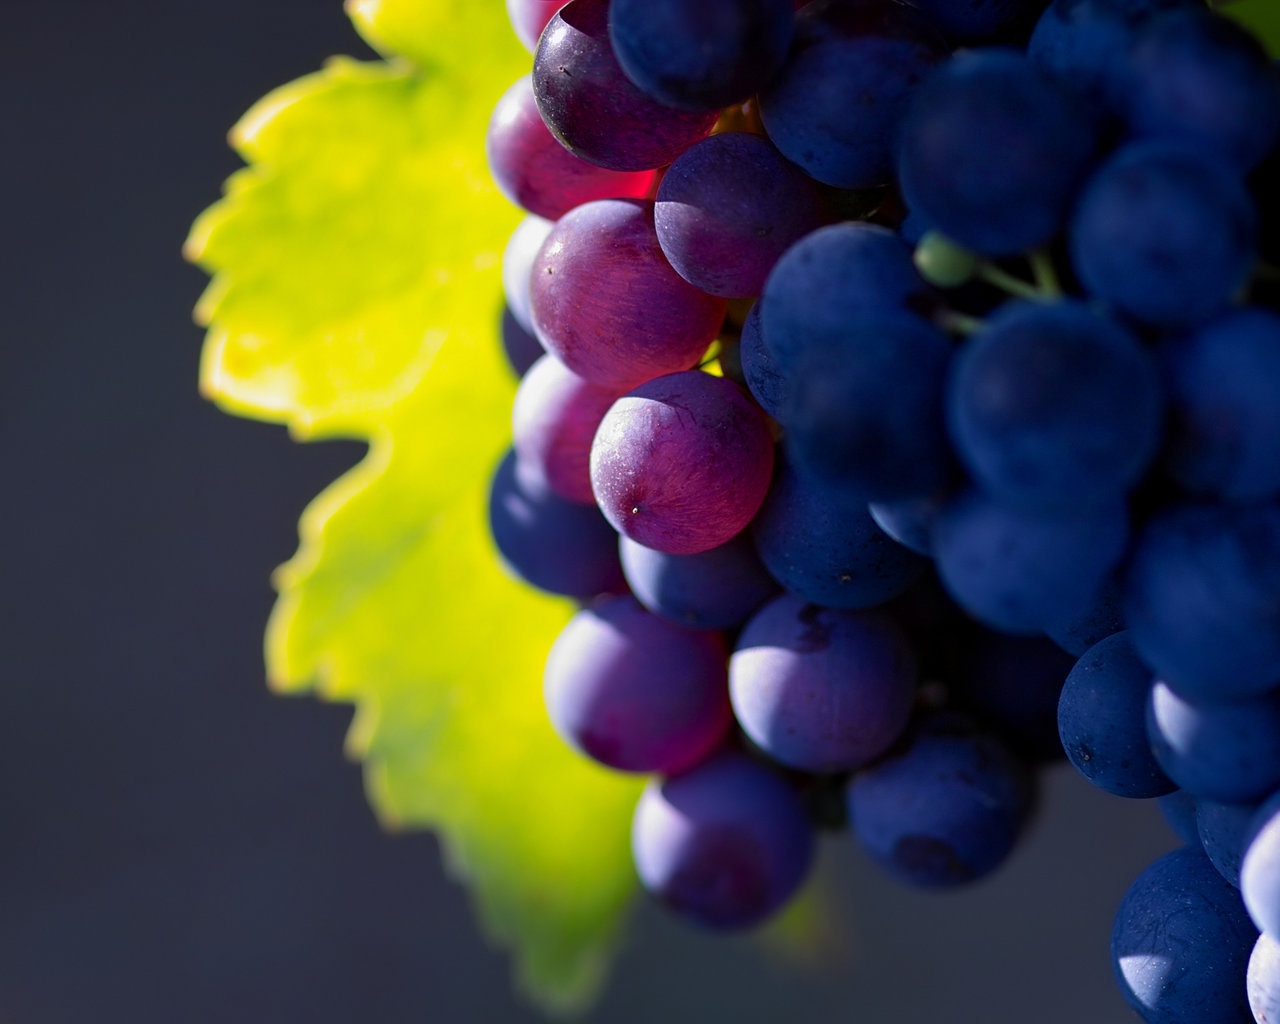 Bunch of Grapes for 1280 x 1024 resolution